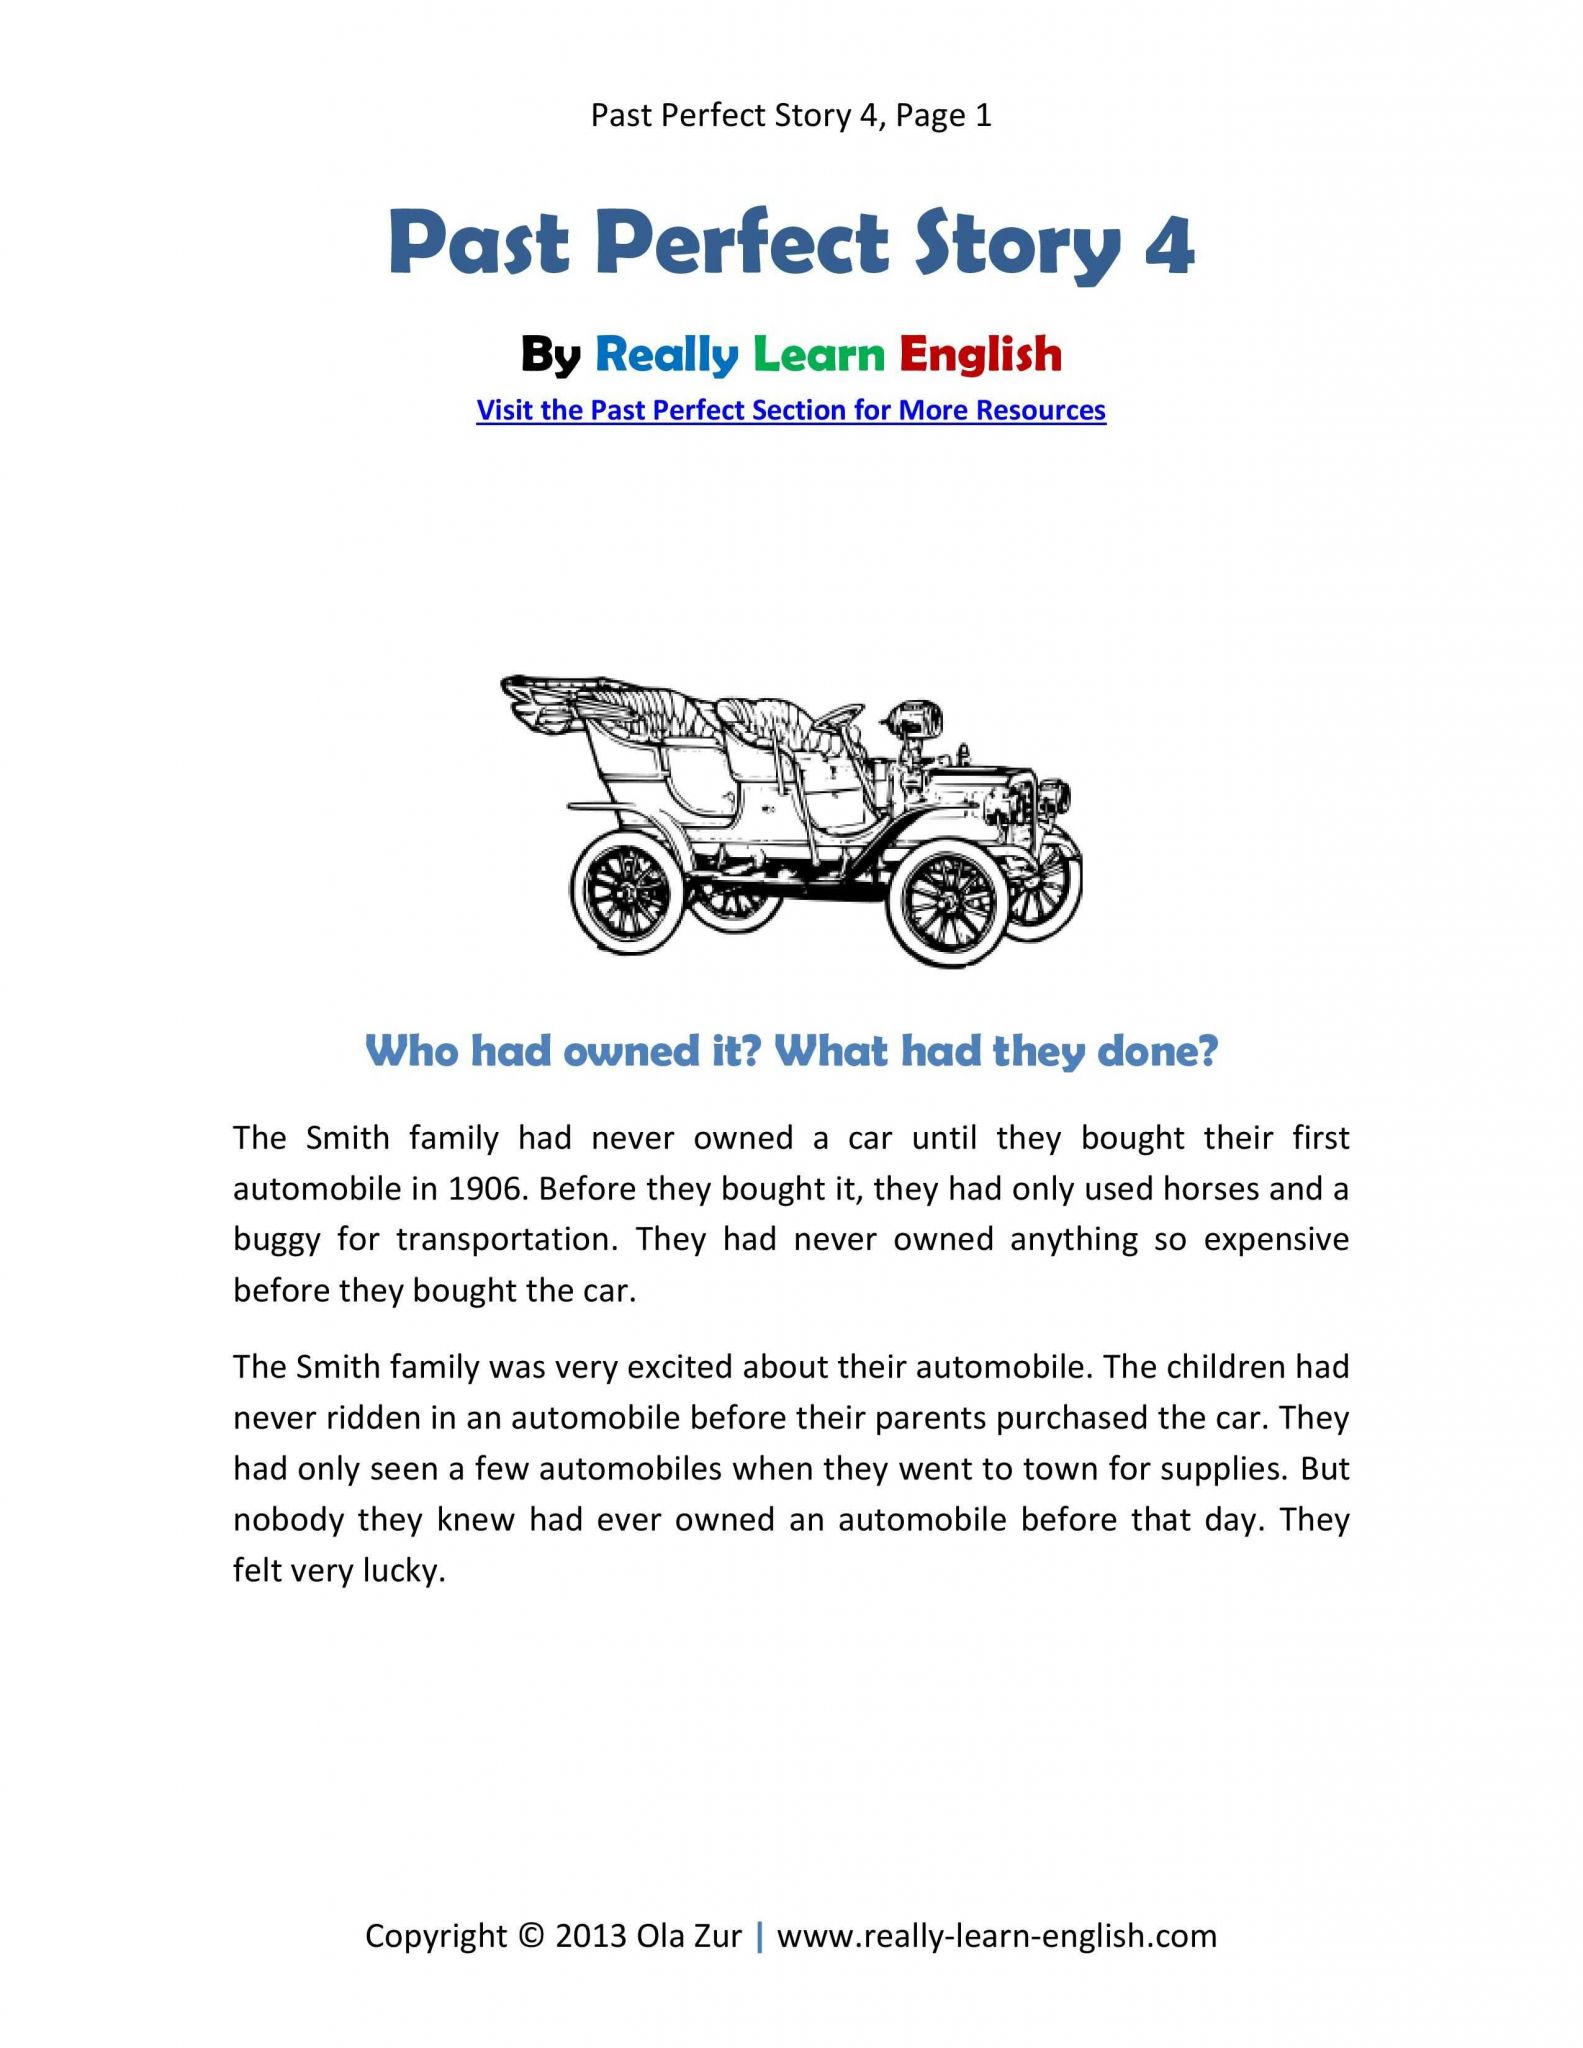 Present Progressive Worksheets and Free Printable Story and Worksheets to Practice the English Past